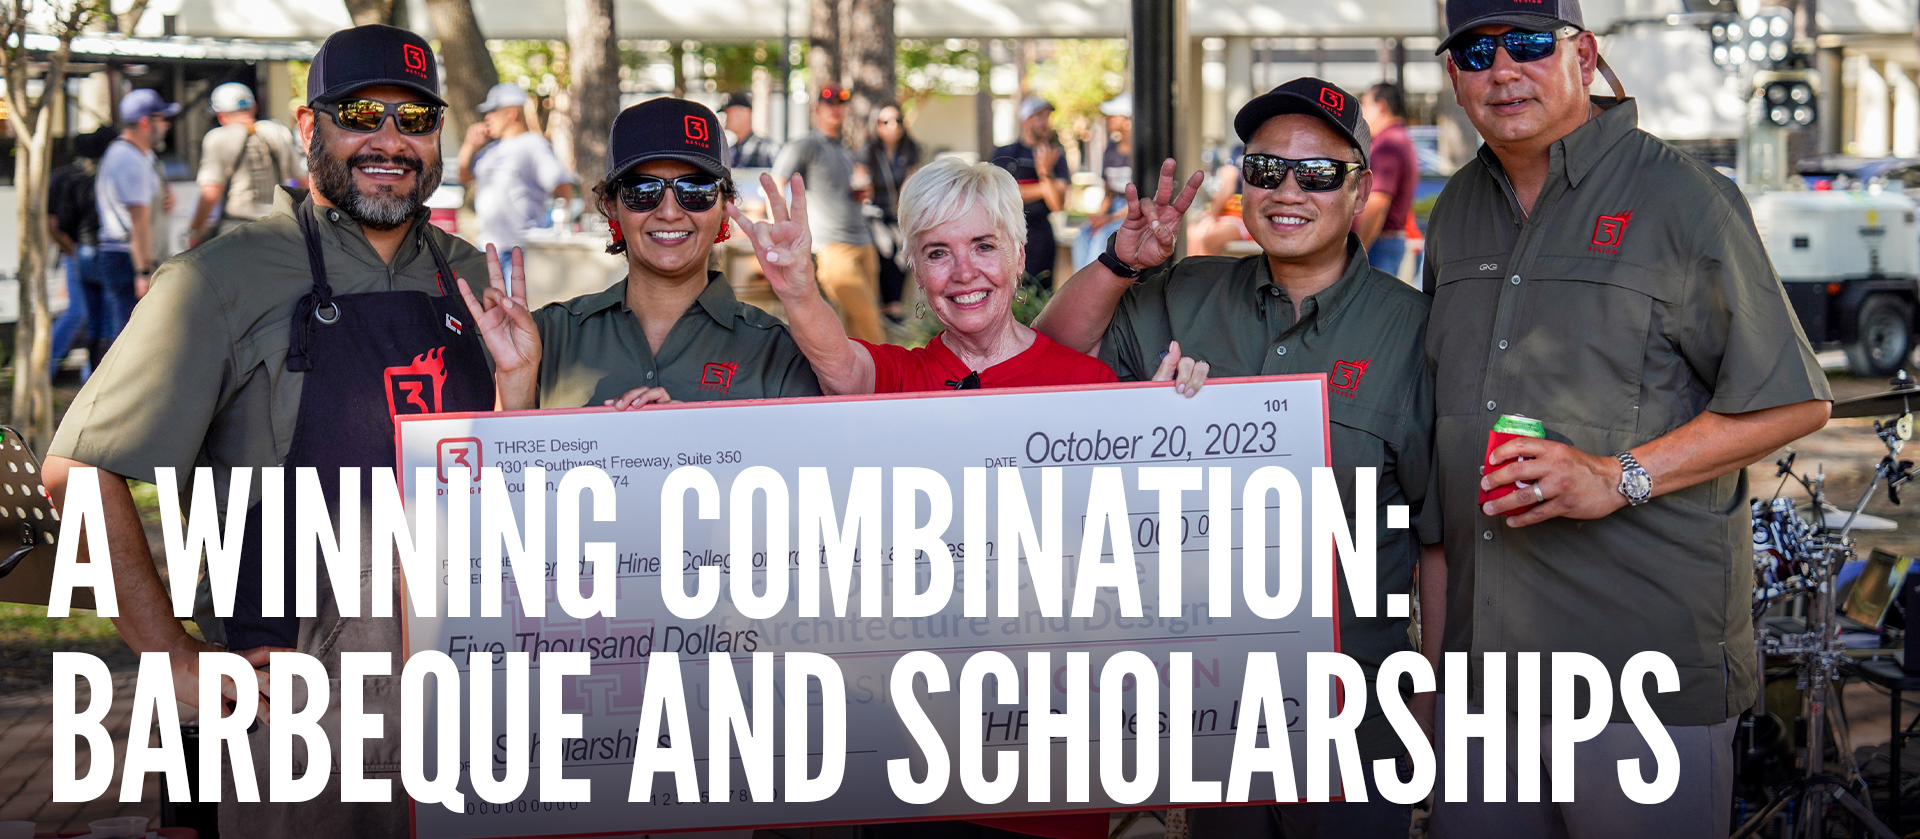 A WINNING COMBINATION: BARBEQUE AND SCHOLARSHIPS